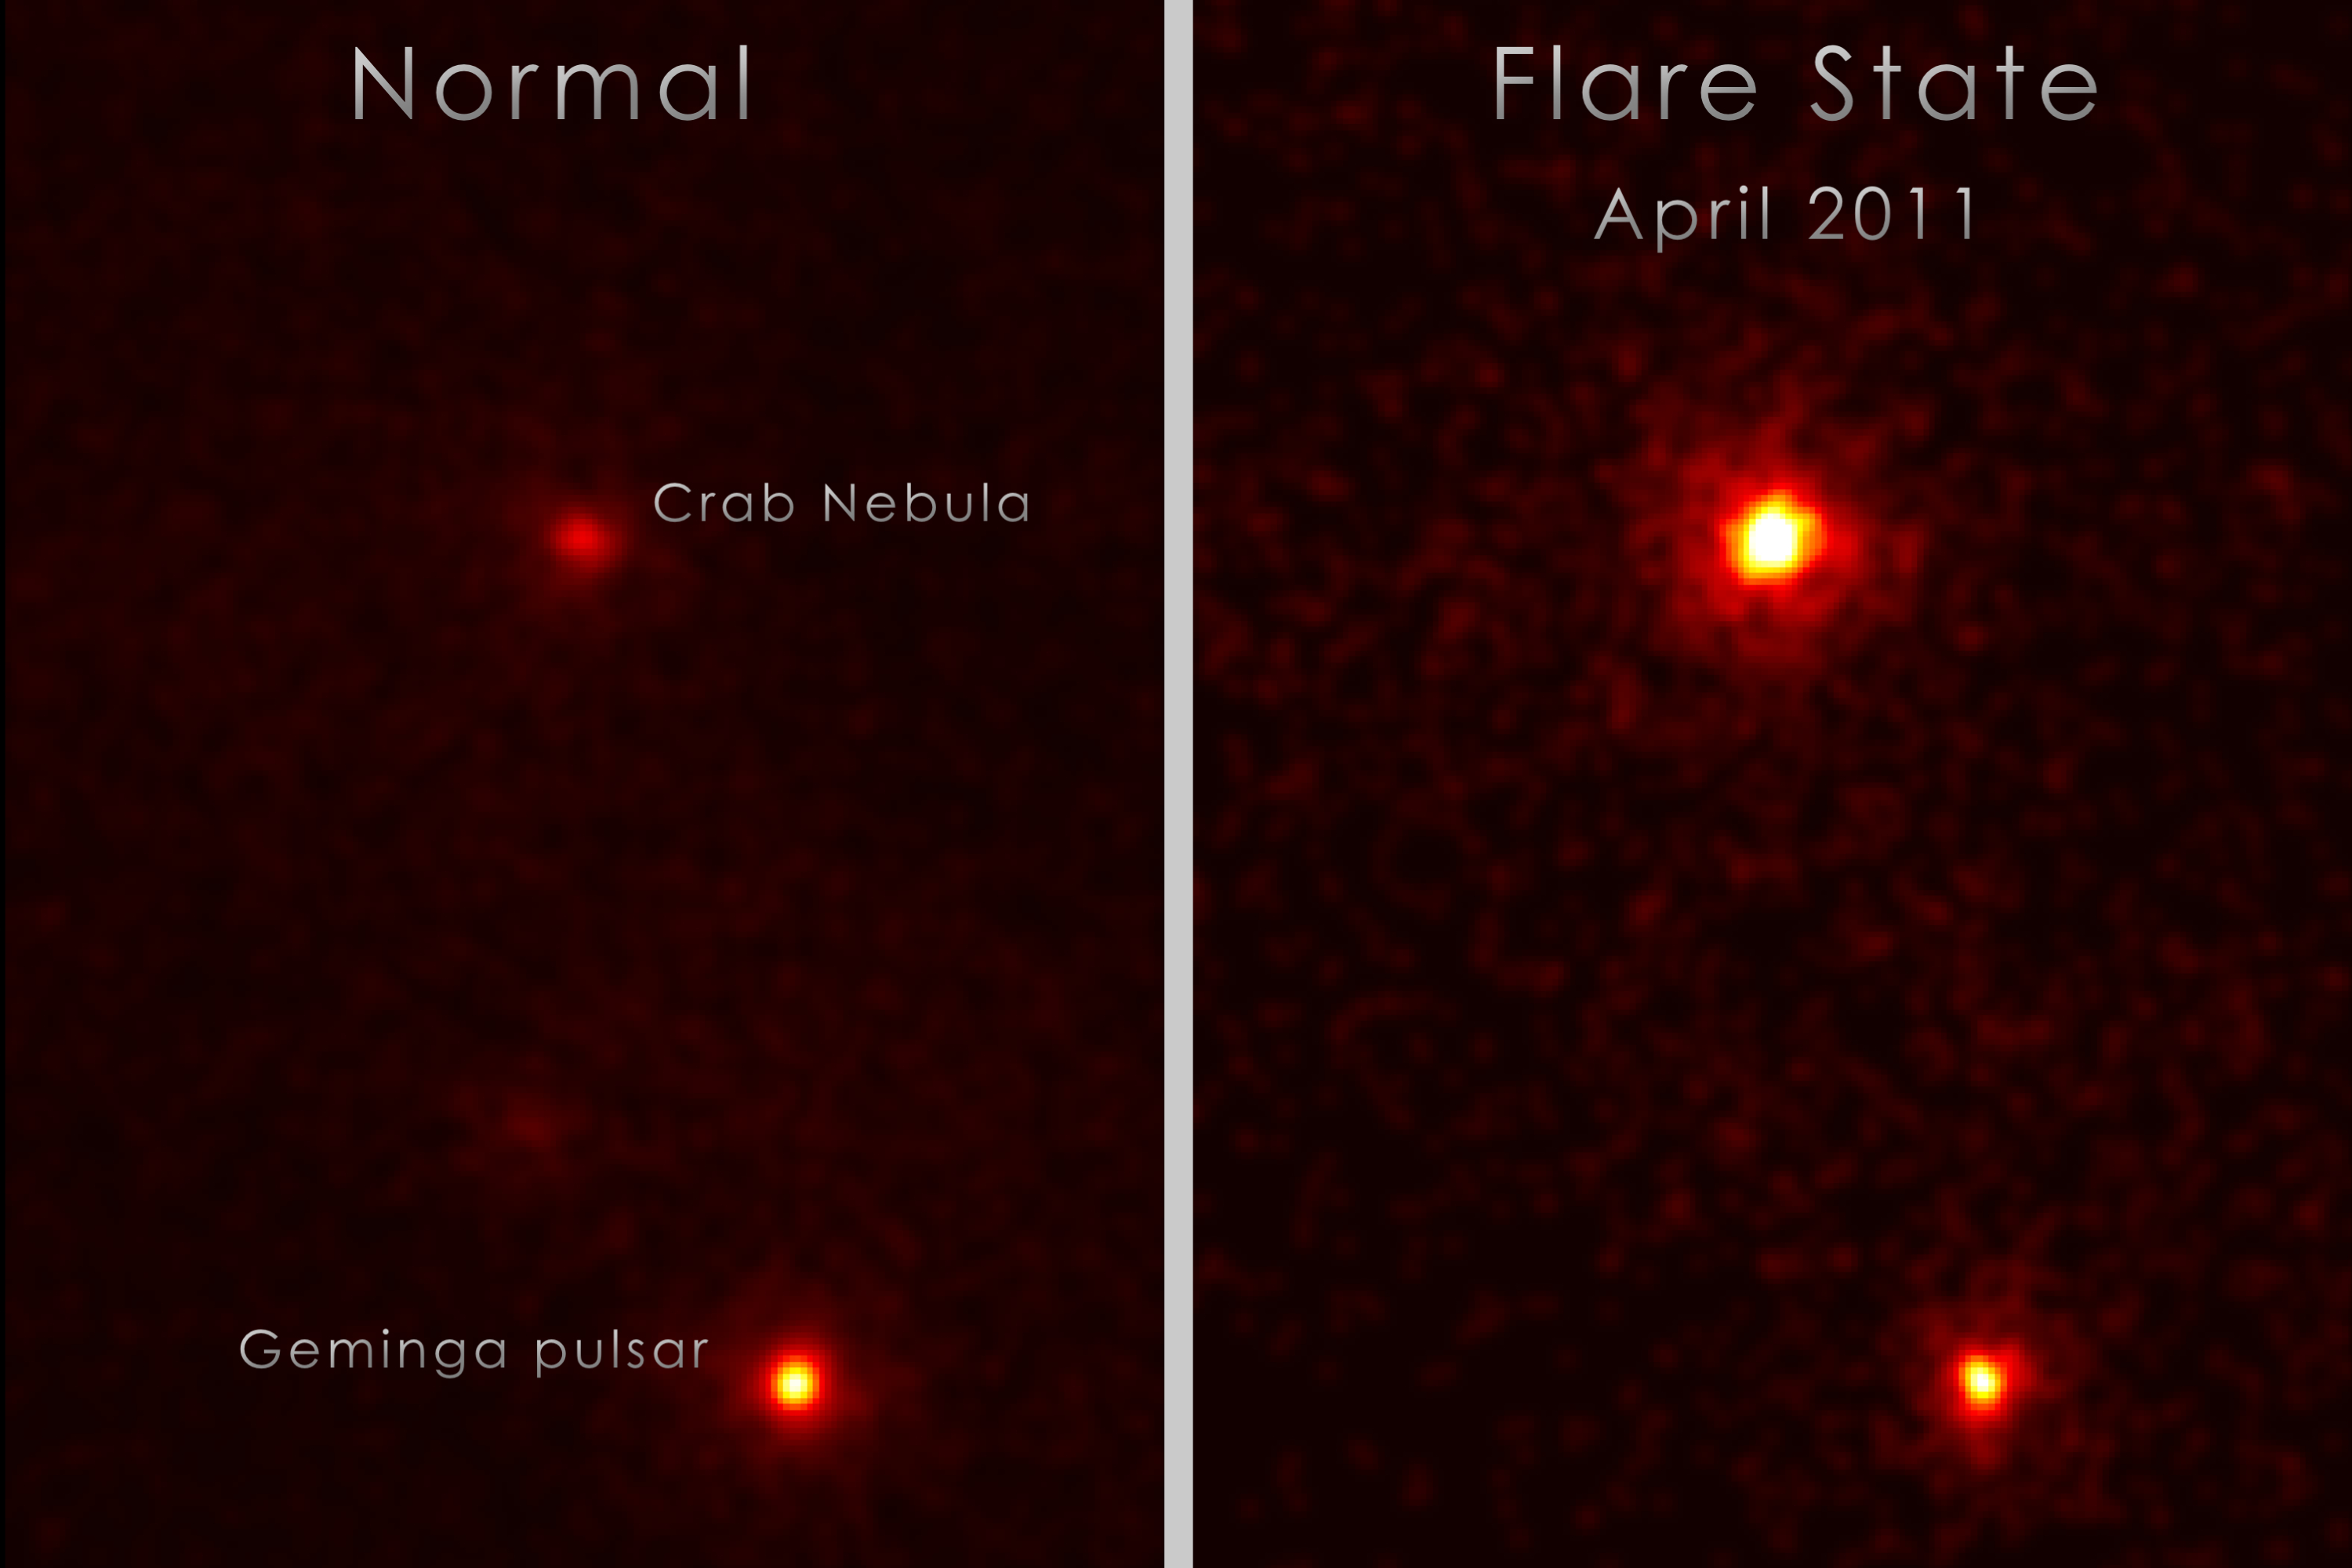 before and after a massive gamma flare in Crab Nebula